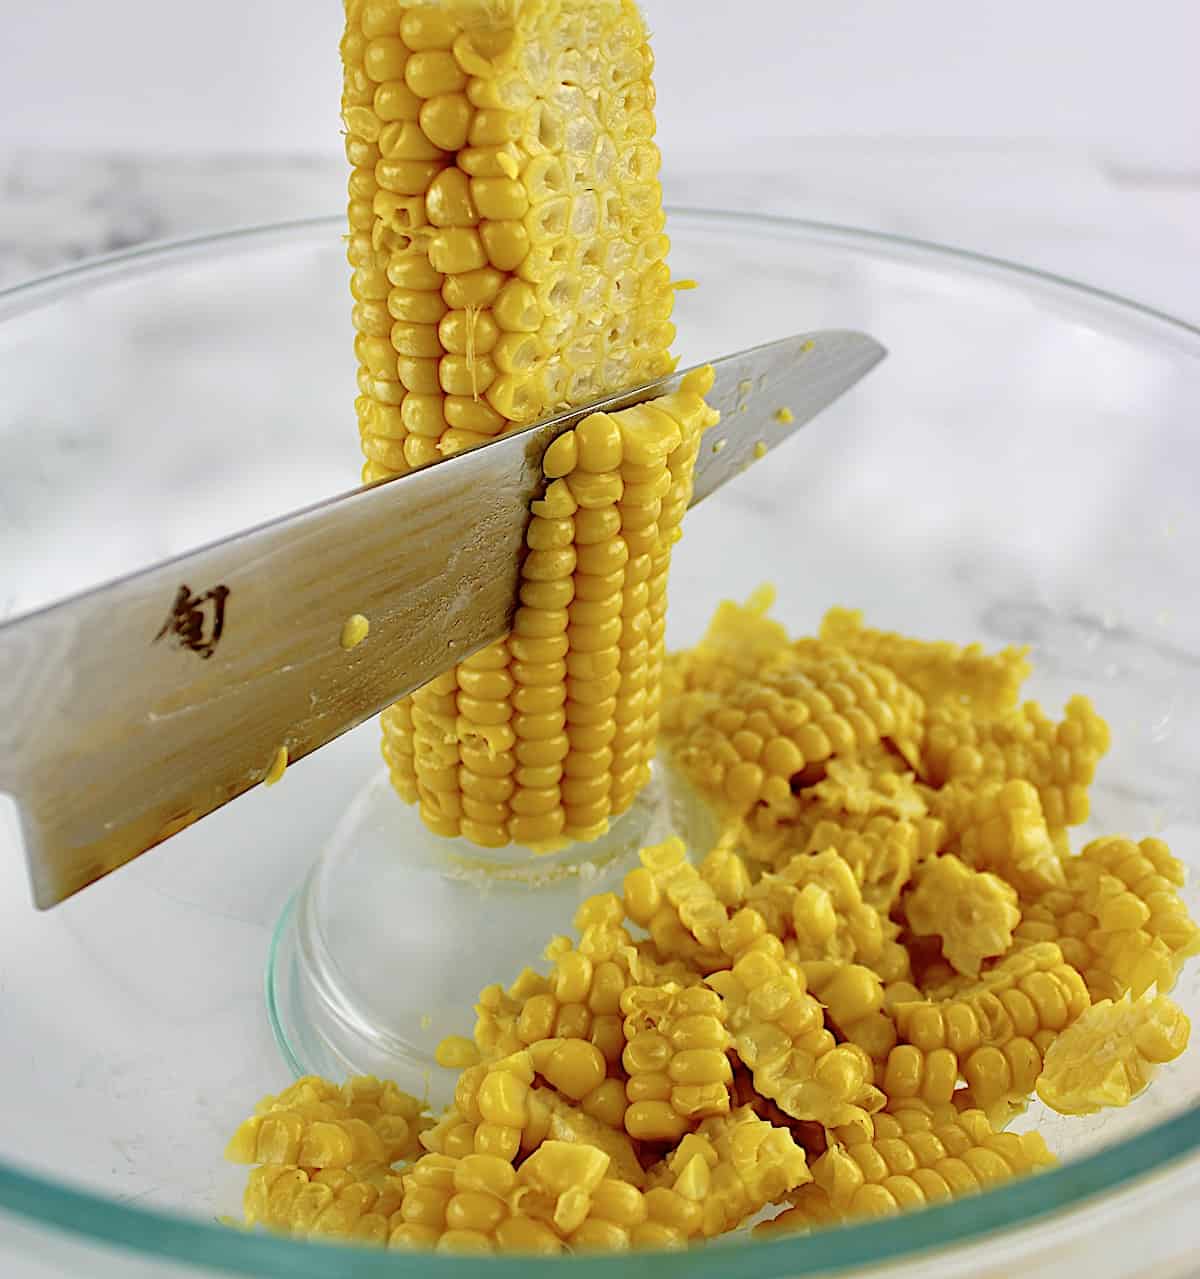 corn being cut off the cob in glass bowl